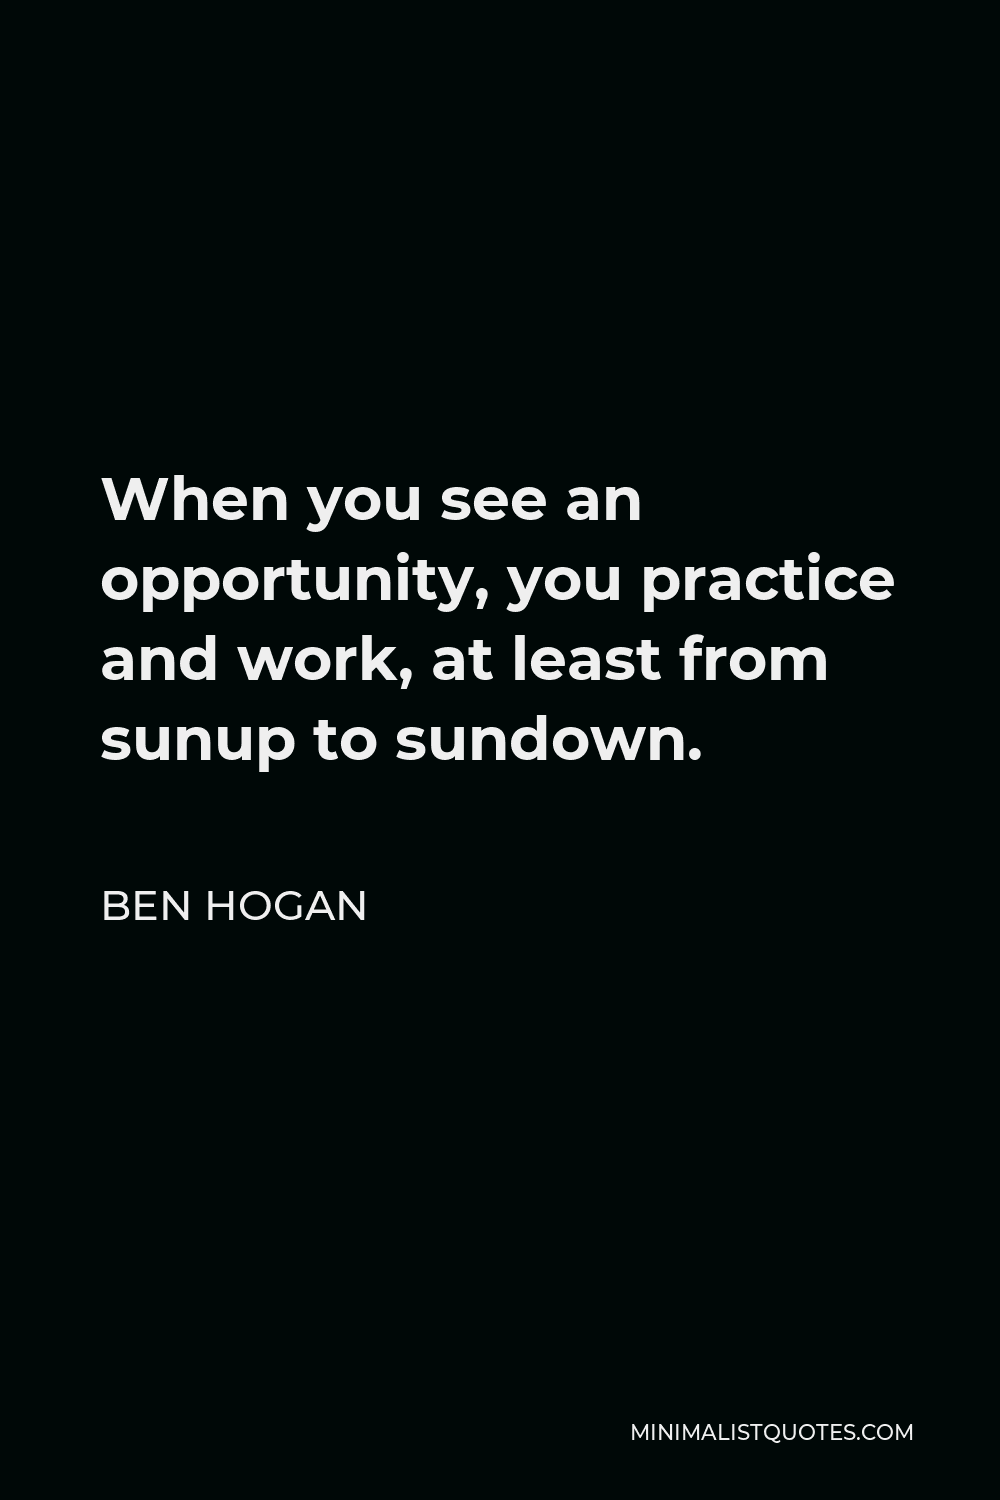 Ben Hogan Quote - When you see an opportunity, you practice and work, at least from sunup to sundown.